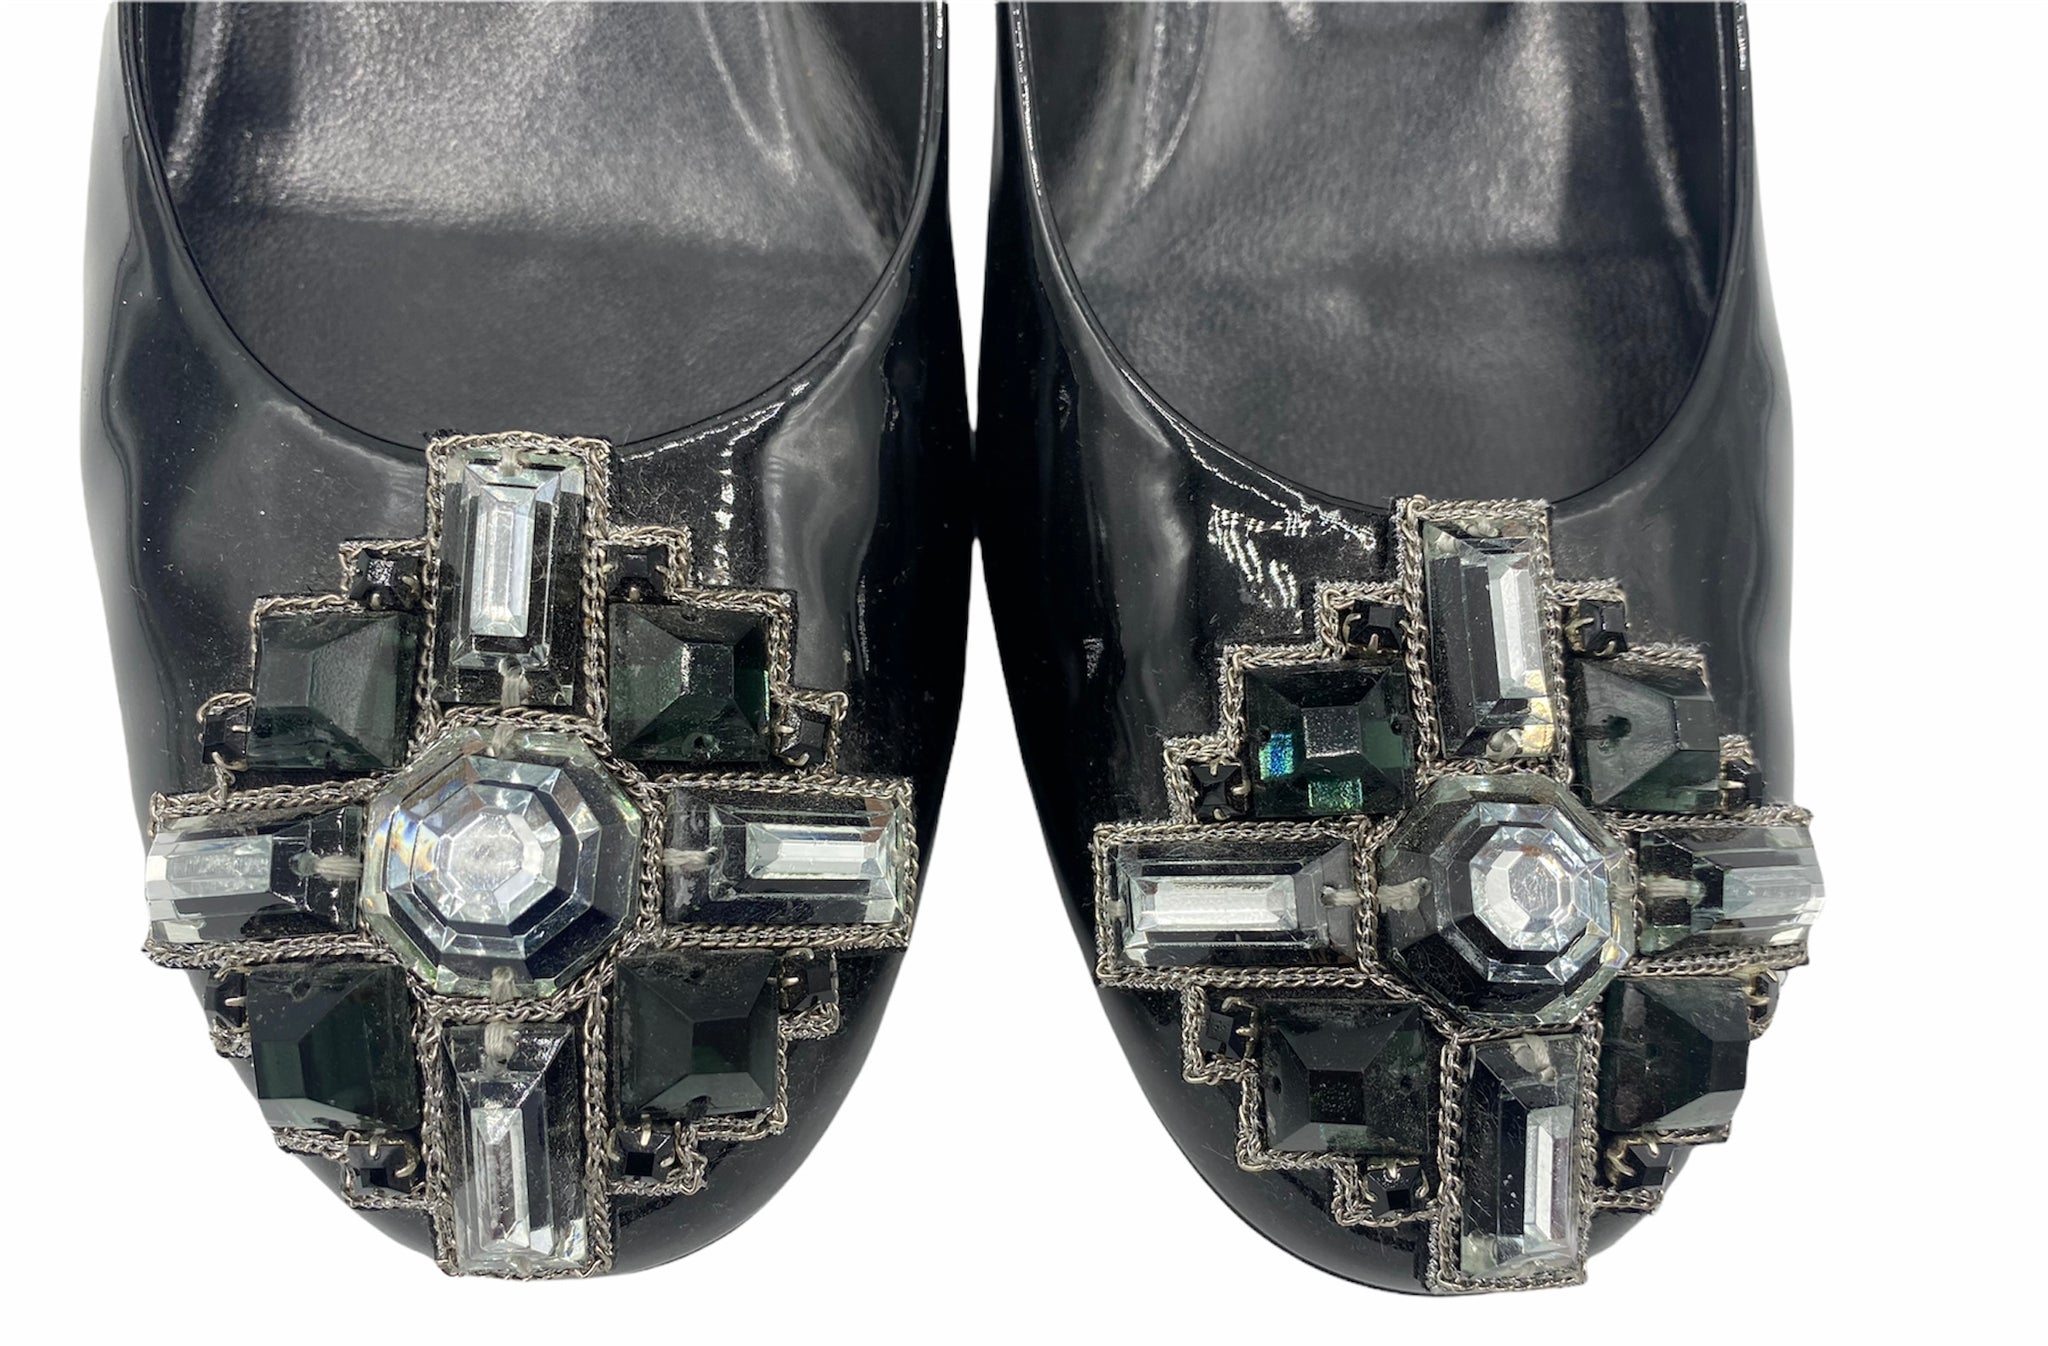 Chanel  Contemporary Black Patent Slippers with Jeweled Embellishment DETAIL 3 of 4